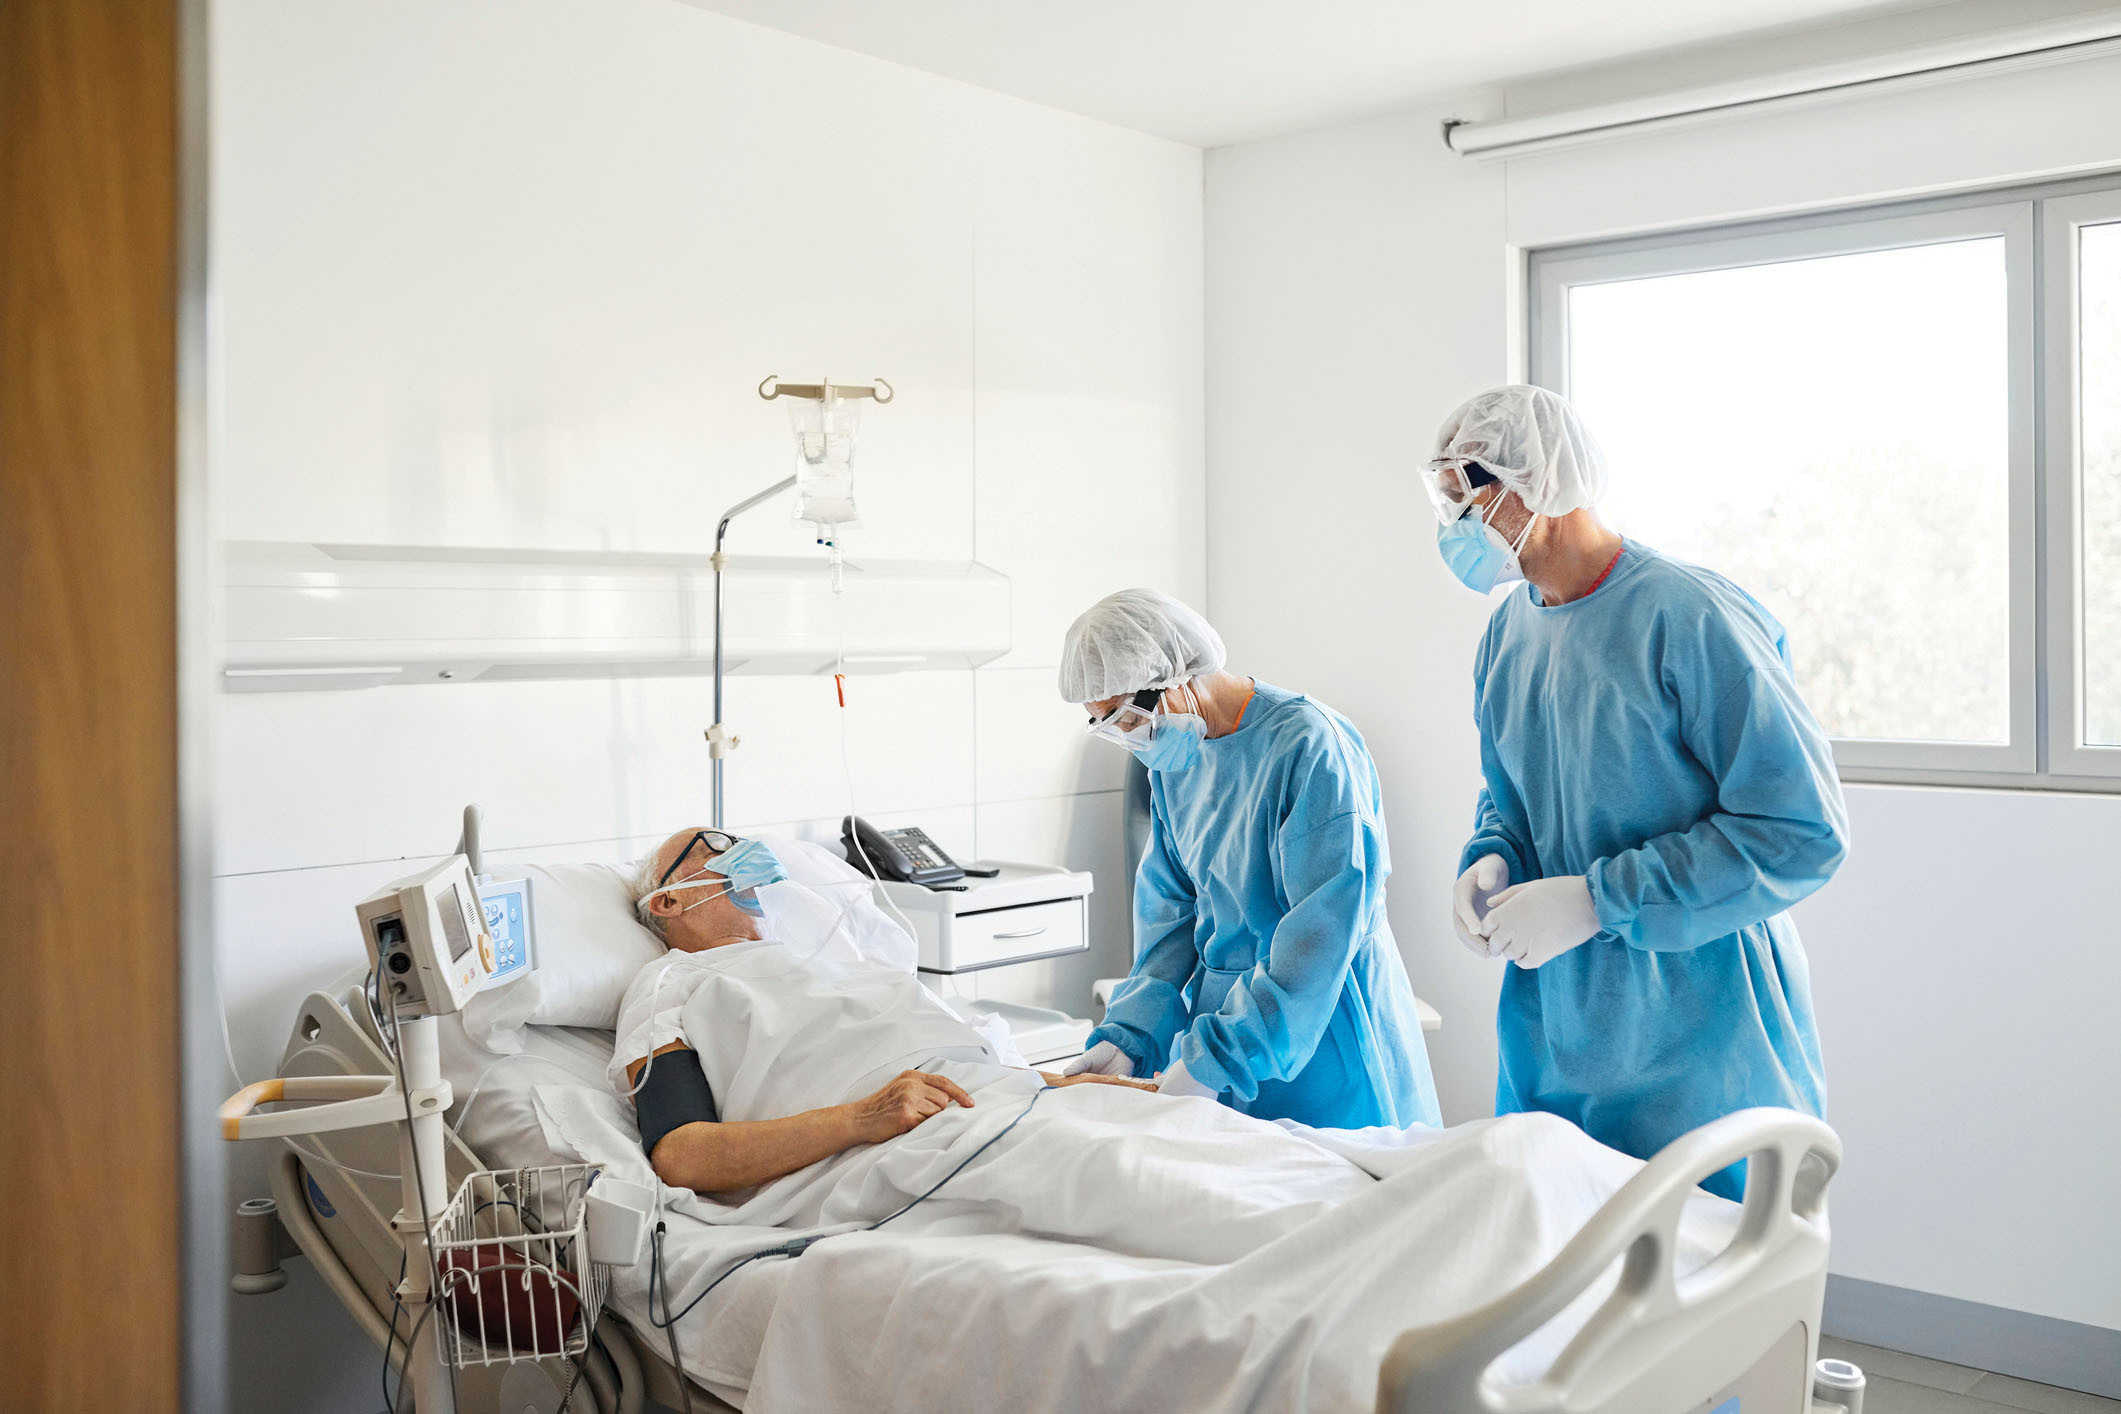 photo of a mature patient in a hospital bed being tended to by two providers wearing protective gear